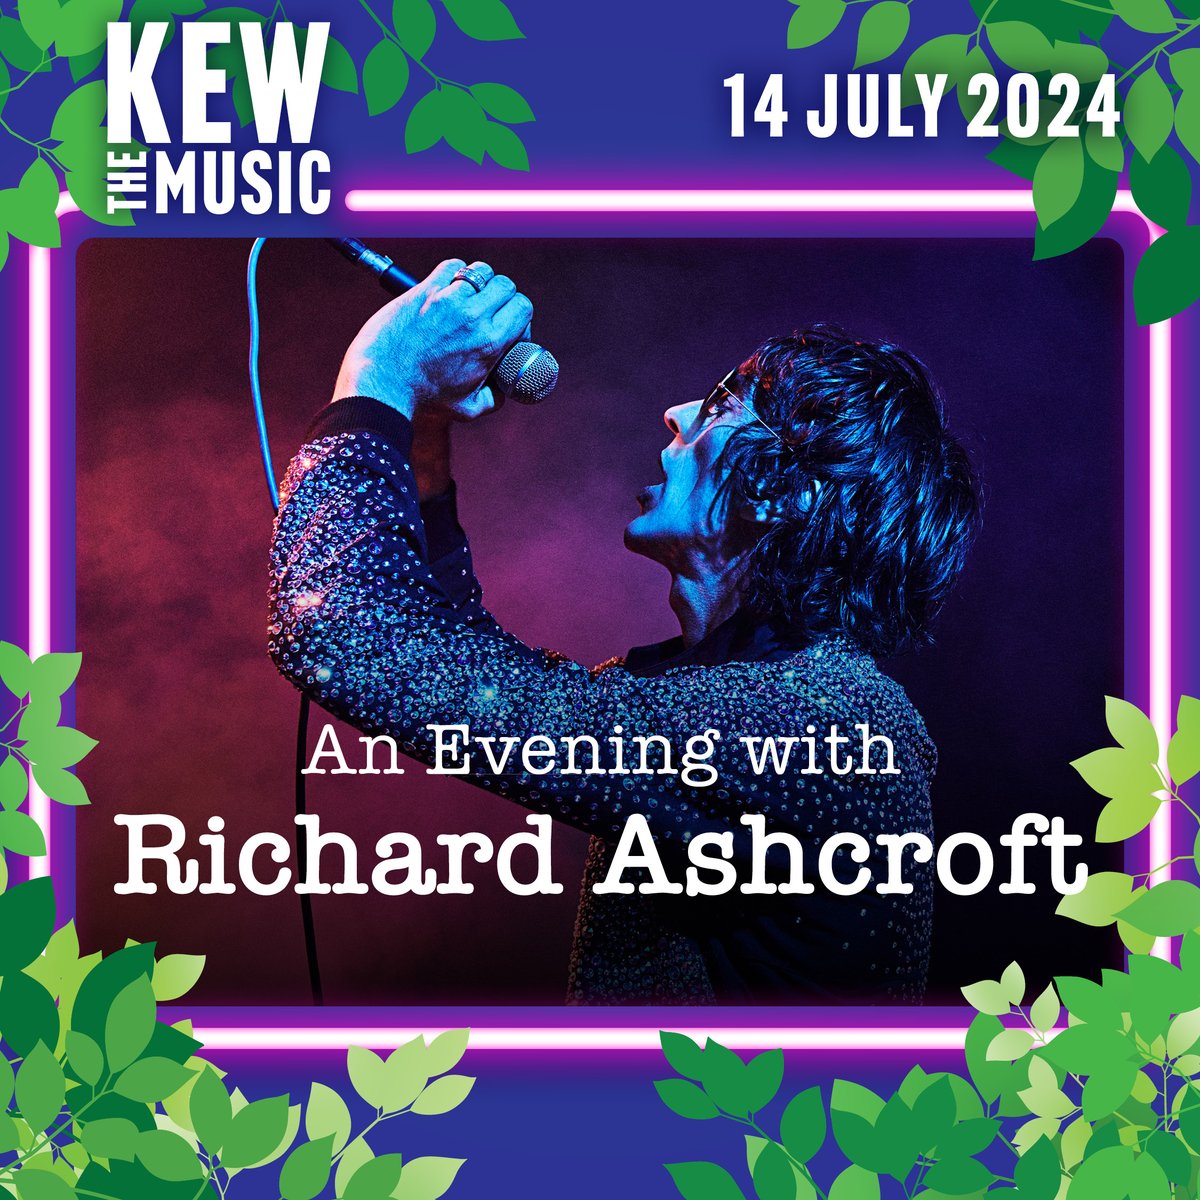 Richard will be headlining at Kew The Music in Kew Gardens, London on Sunday 14th July where he will be performing songs spanning his wonderful repertoire. Don’t miss out. Pre-sale tickets are now on sale! kewthemusic.gigantic.com/kew-the-music-…